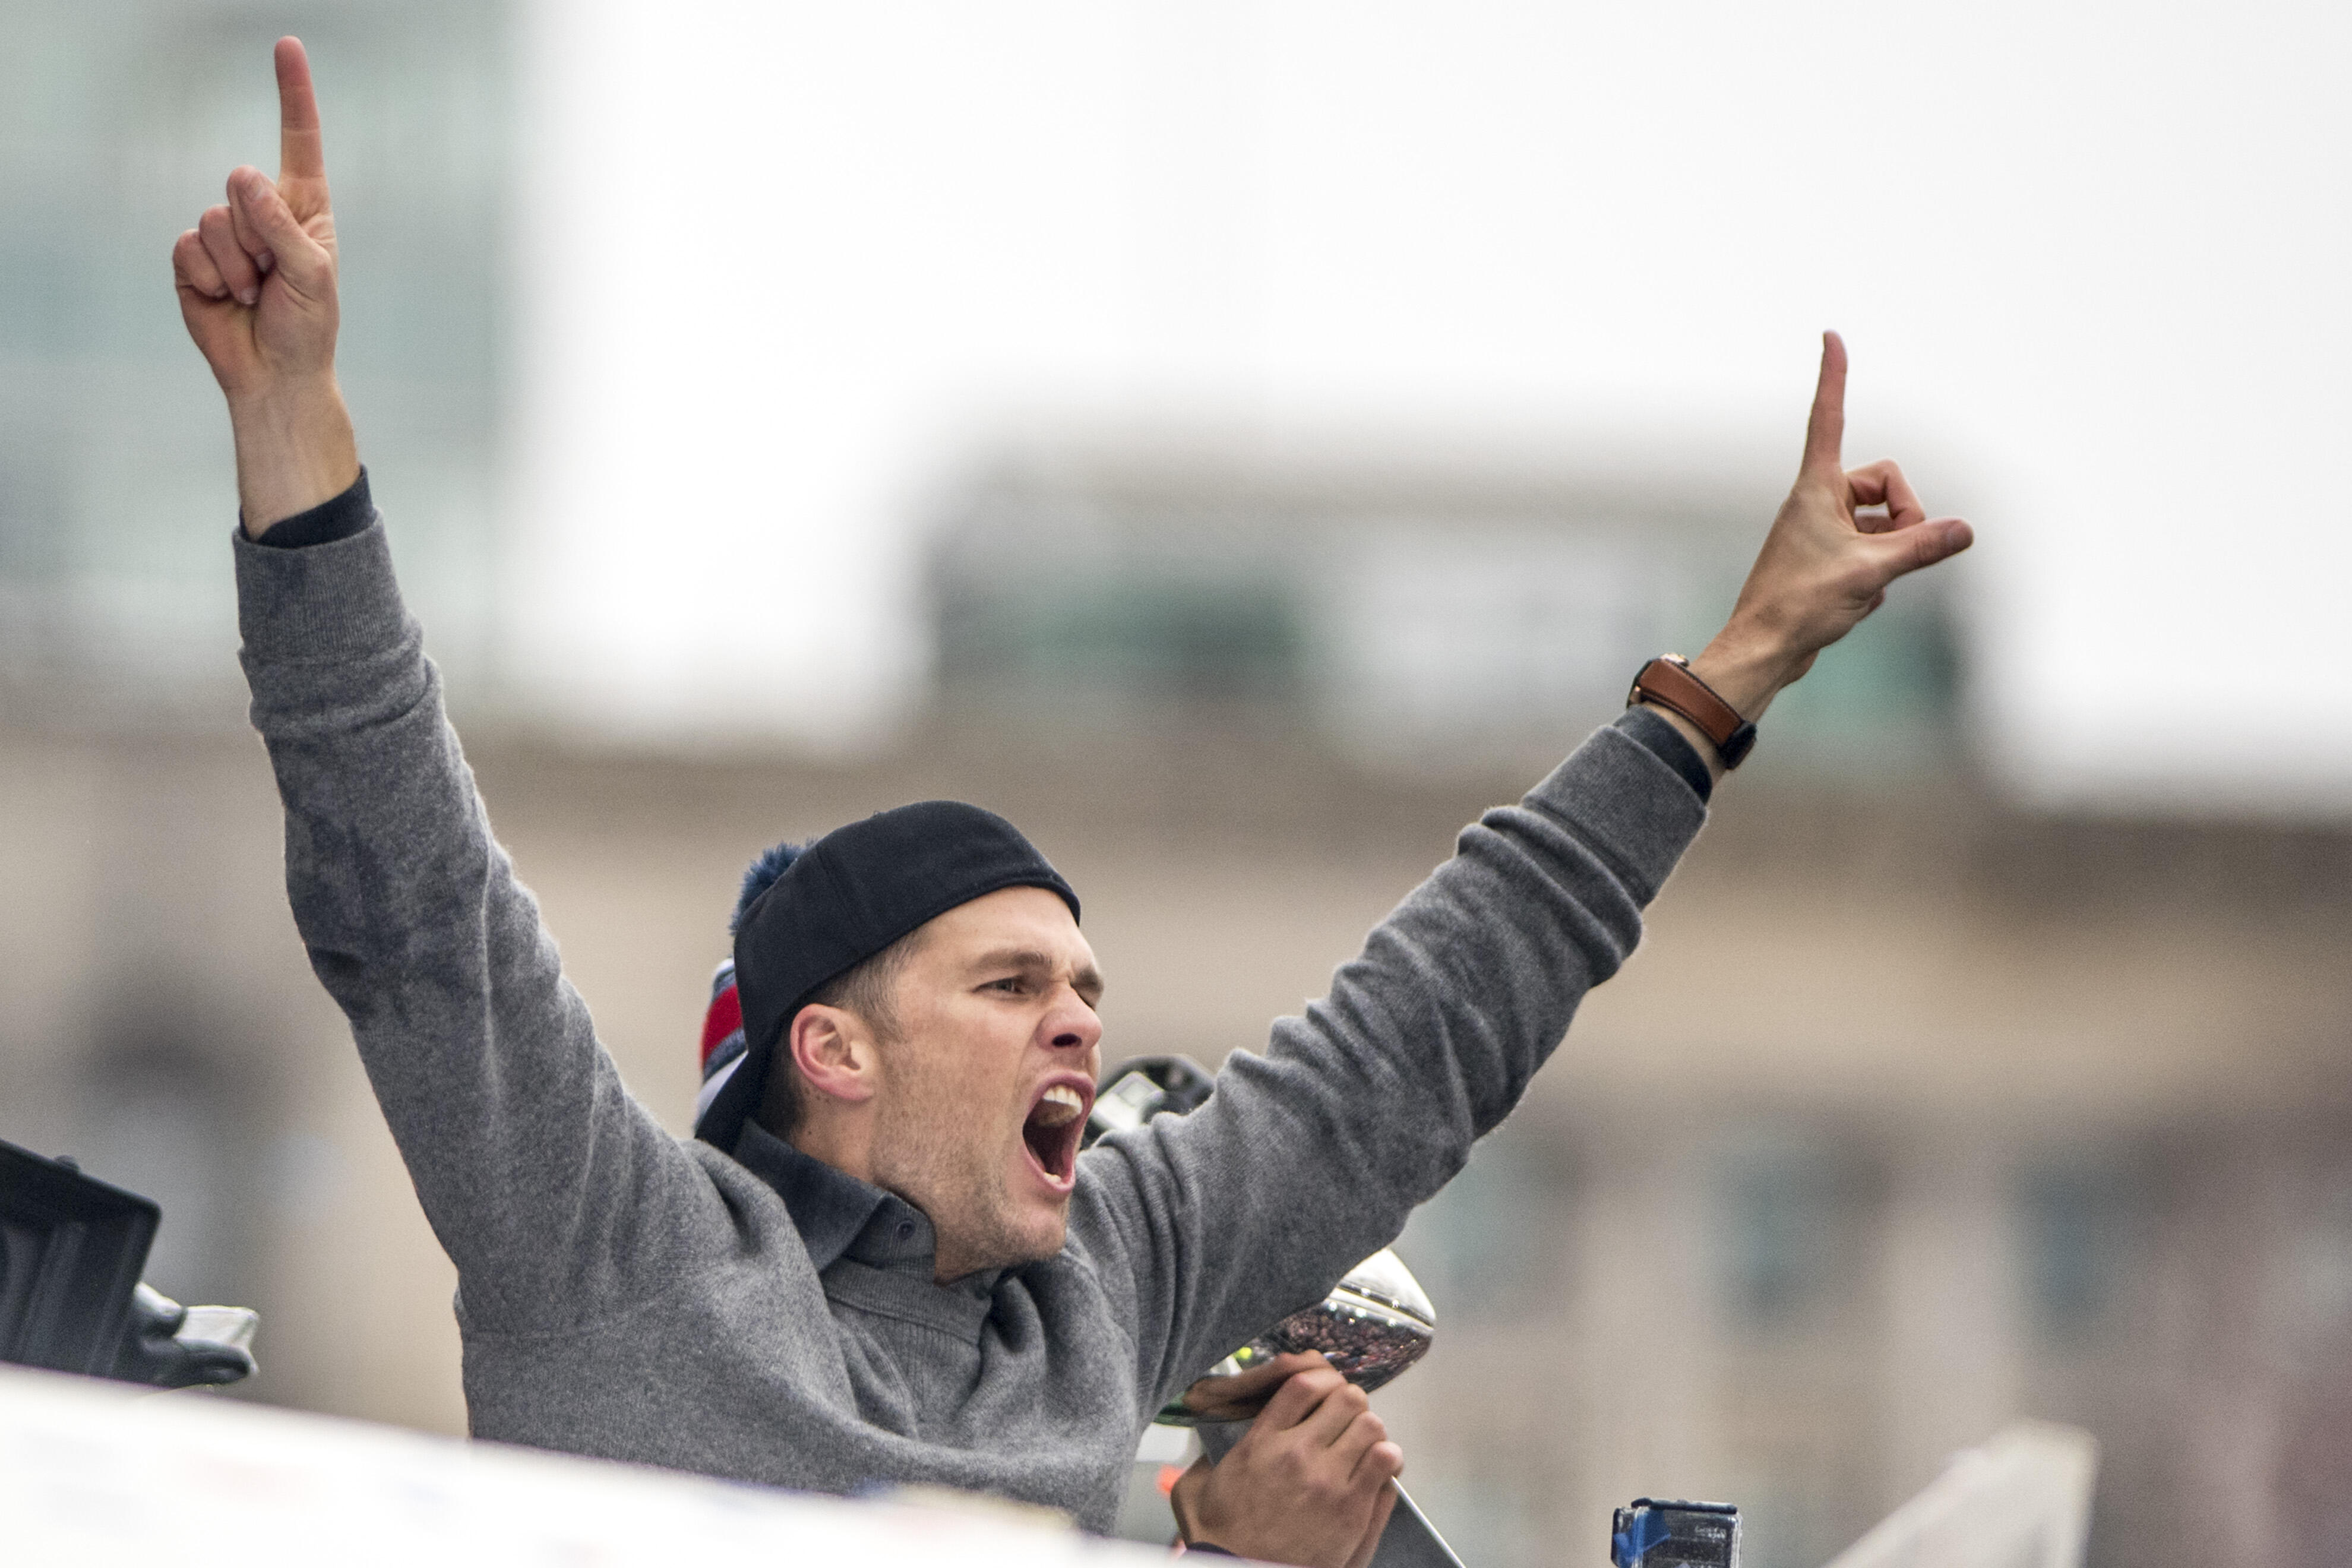 BOSTON, MA - FEBRUARY 07: Tom Brady of the New England Patriots celebrates during the Super Bowl victory parade on February 7, 2017 in Boston, Massachusetts. The Patriots defeated the Atlanta Falcons 34-28 in overtime in Super Bowl 51. (Photo by Billie We